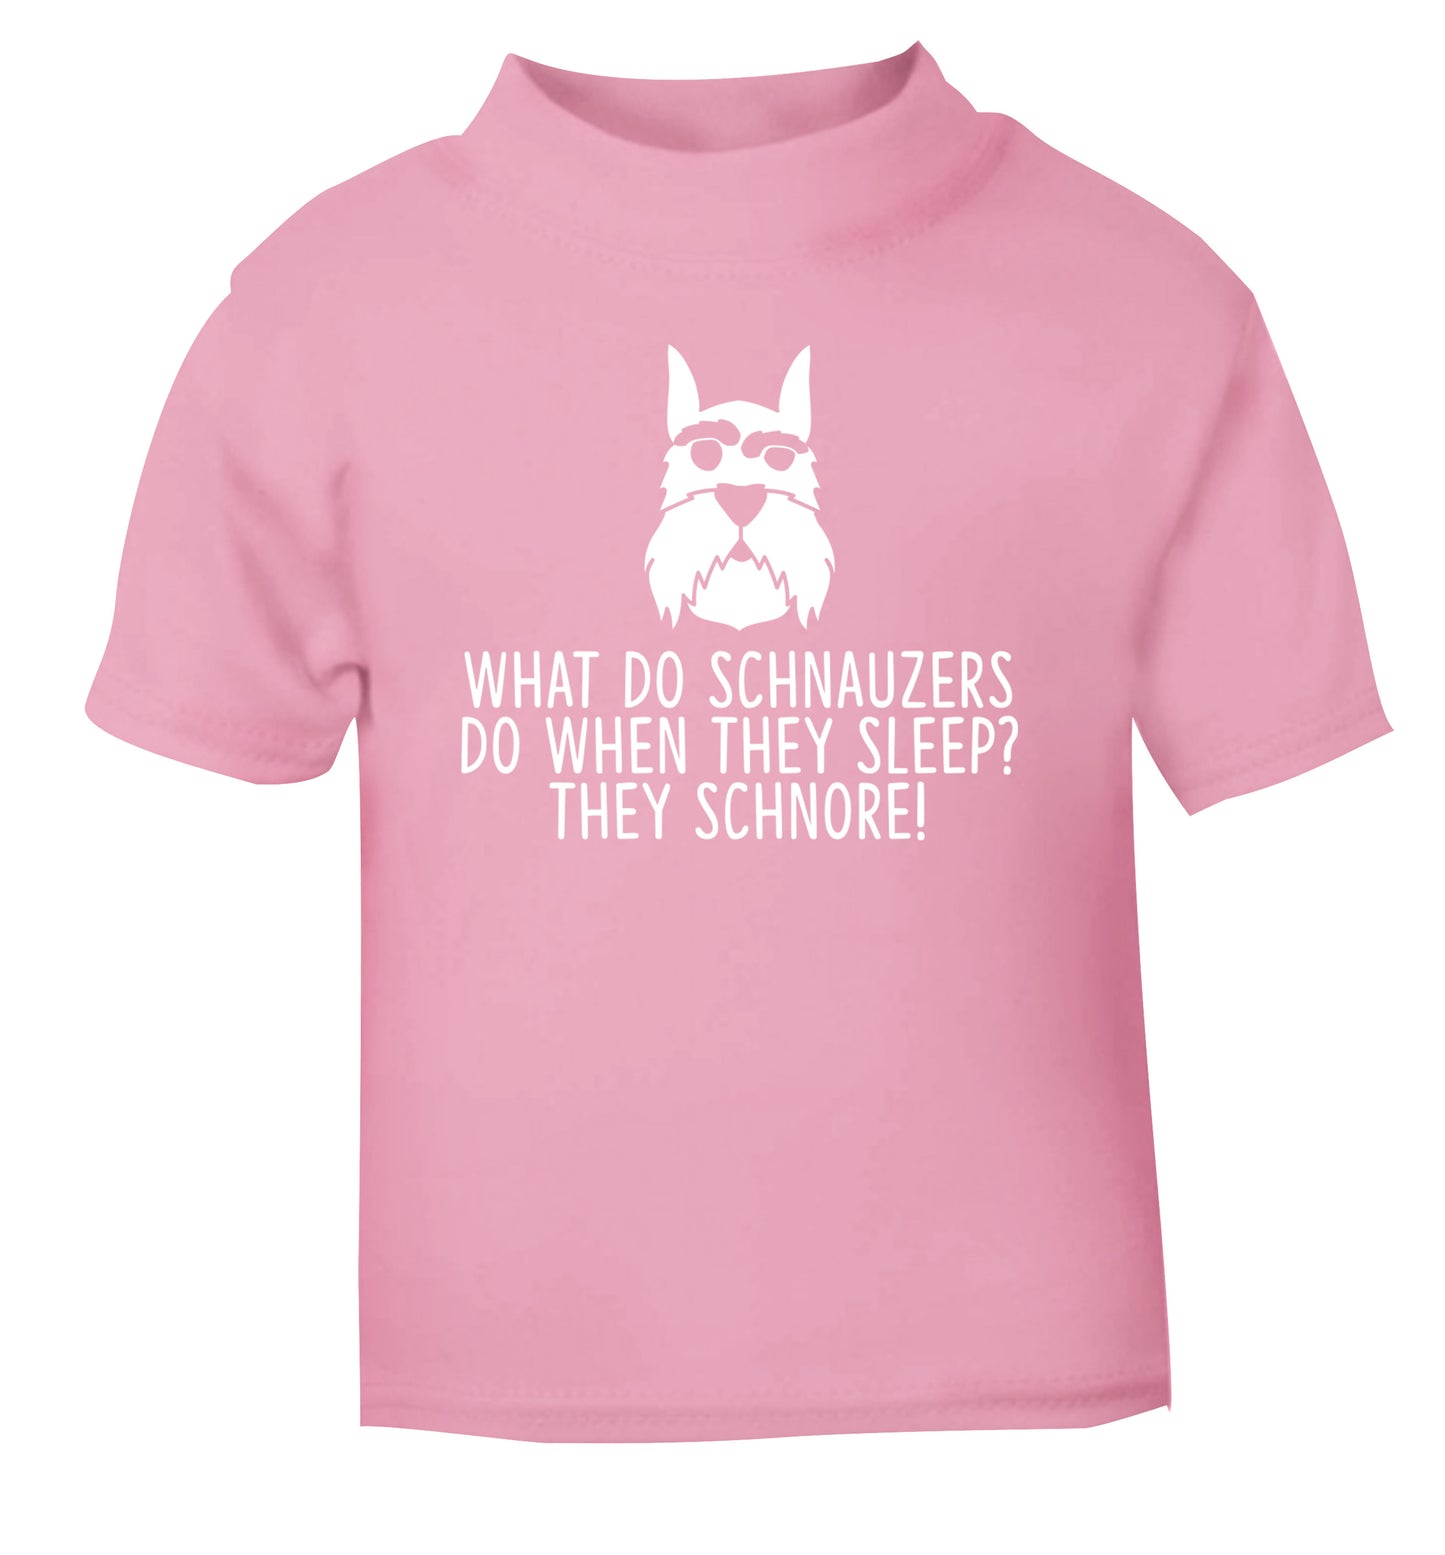 What do schnauzers do when they sleep? Schnore! light pink Baby Toddler Tshirt 2 Years